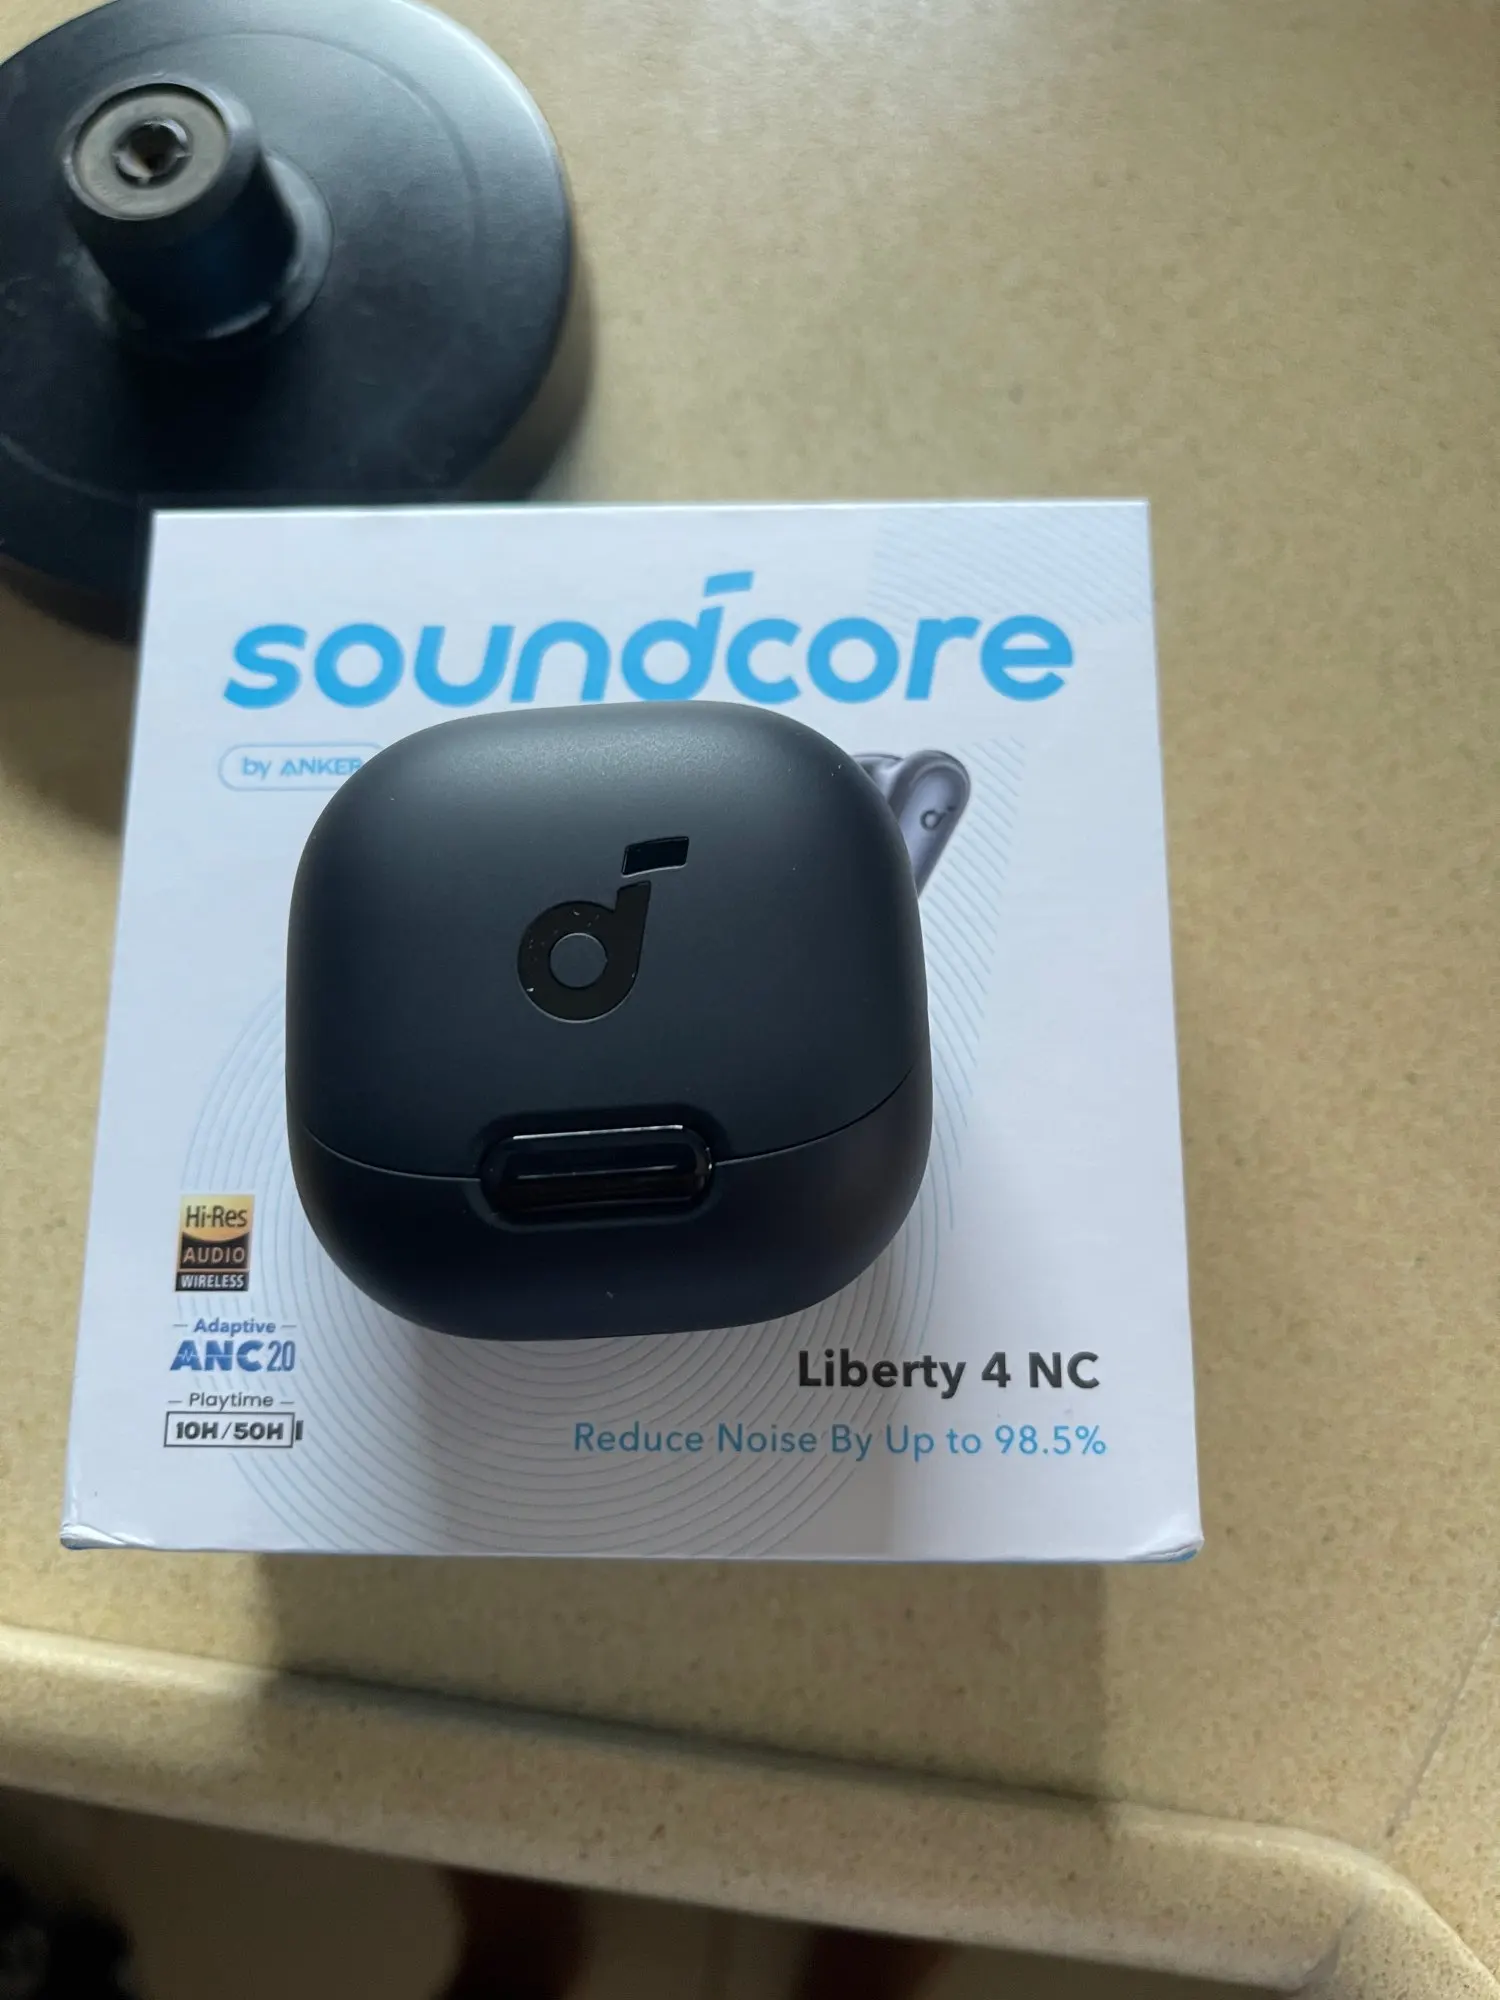 Anker SoundCore Liberty 4 NC True-Wireless Earbuds Reduce Noise By Up to 98.5% photo review